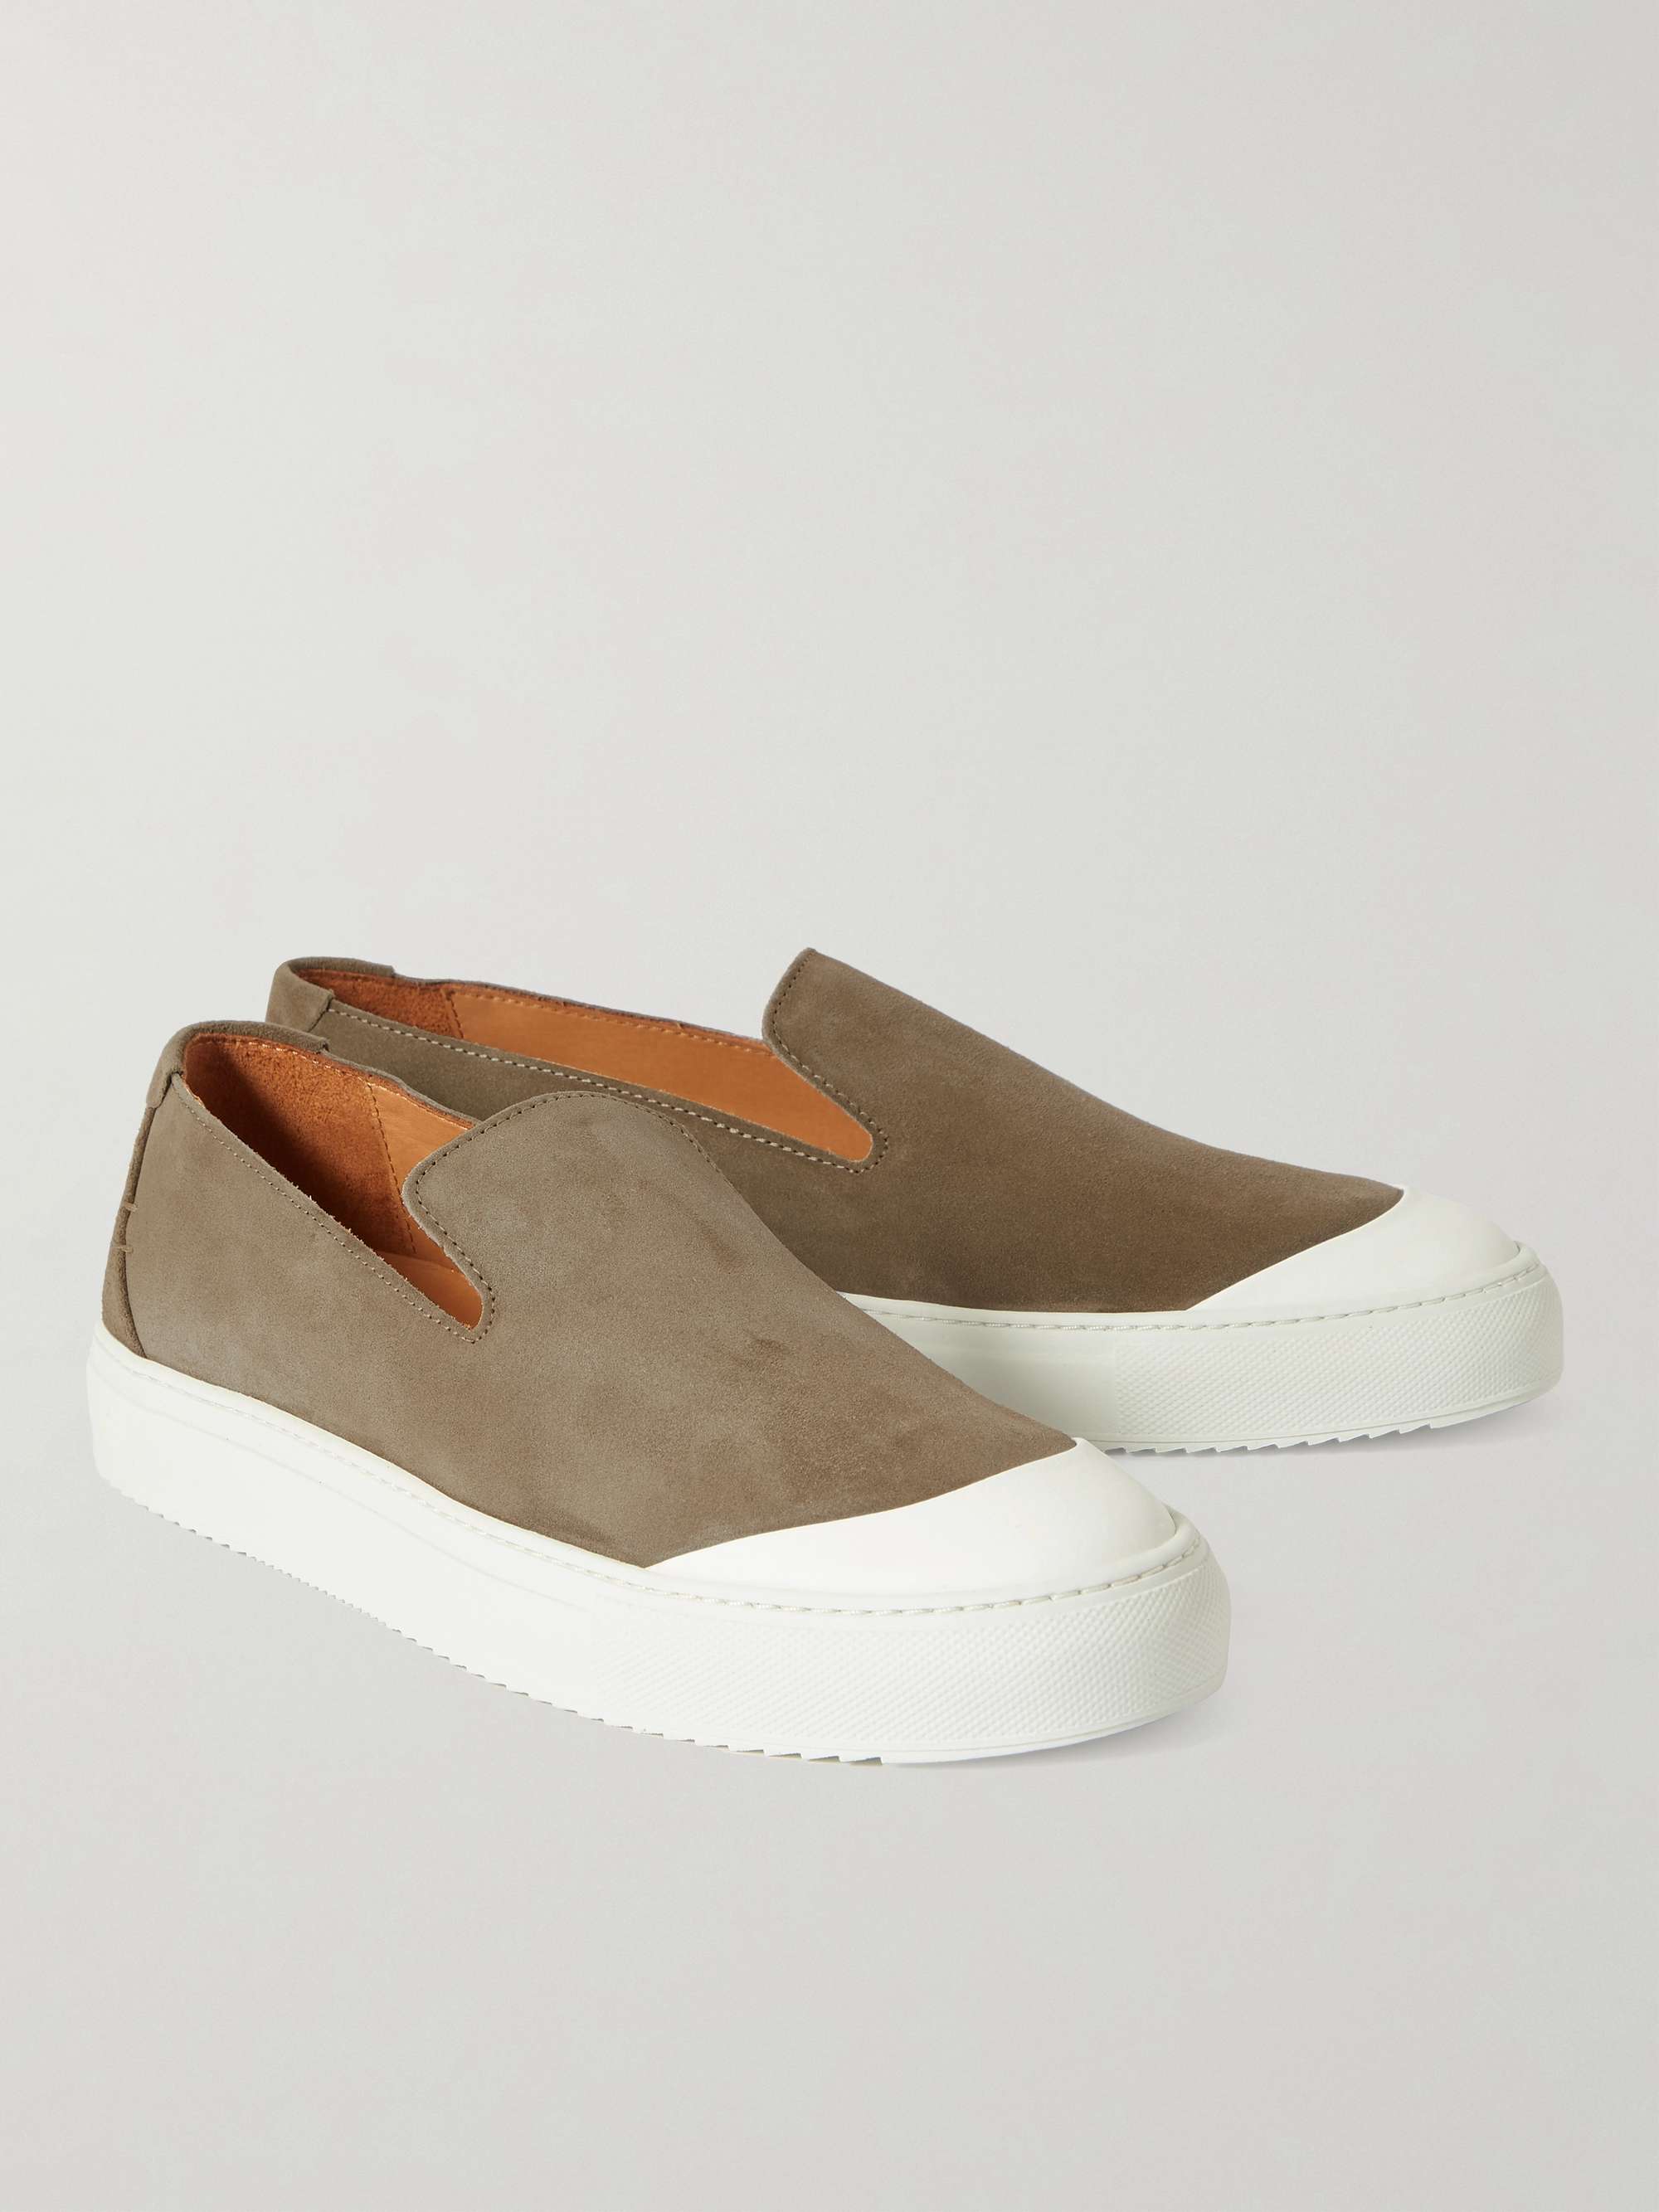 MR P. Larry Regenerated Suede by evolo® Slip-On Sneakers for Men | MR ...